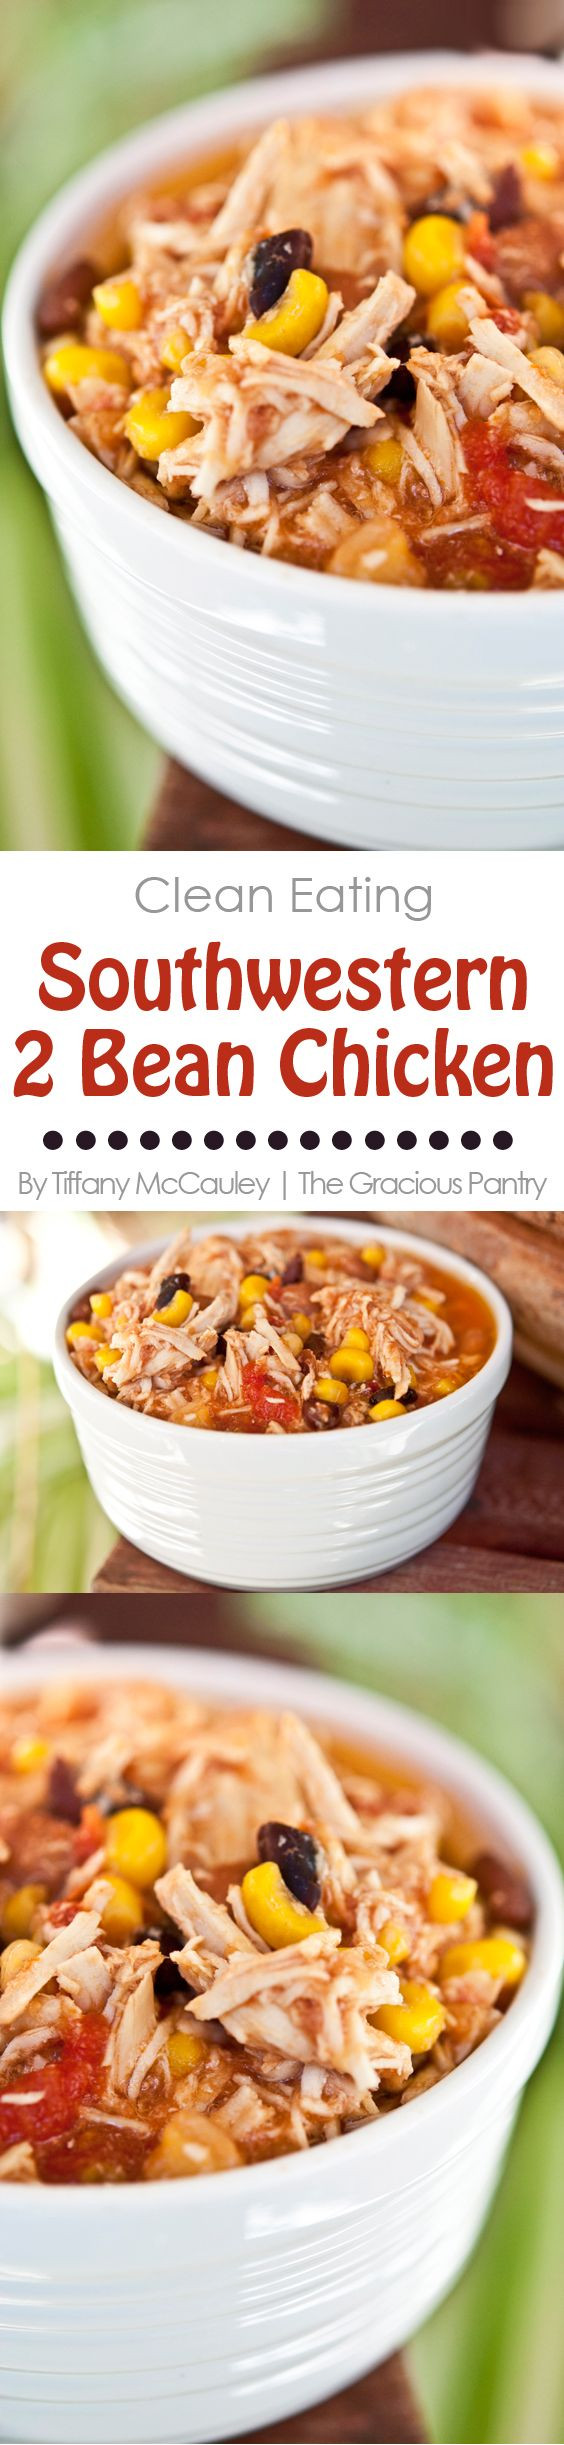 Clean Eating For Picky Eaters
 Clean Eating Slow Cooker Southwestern 2 Bean Chicken